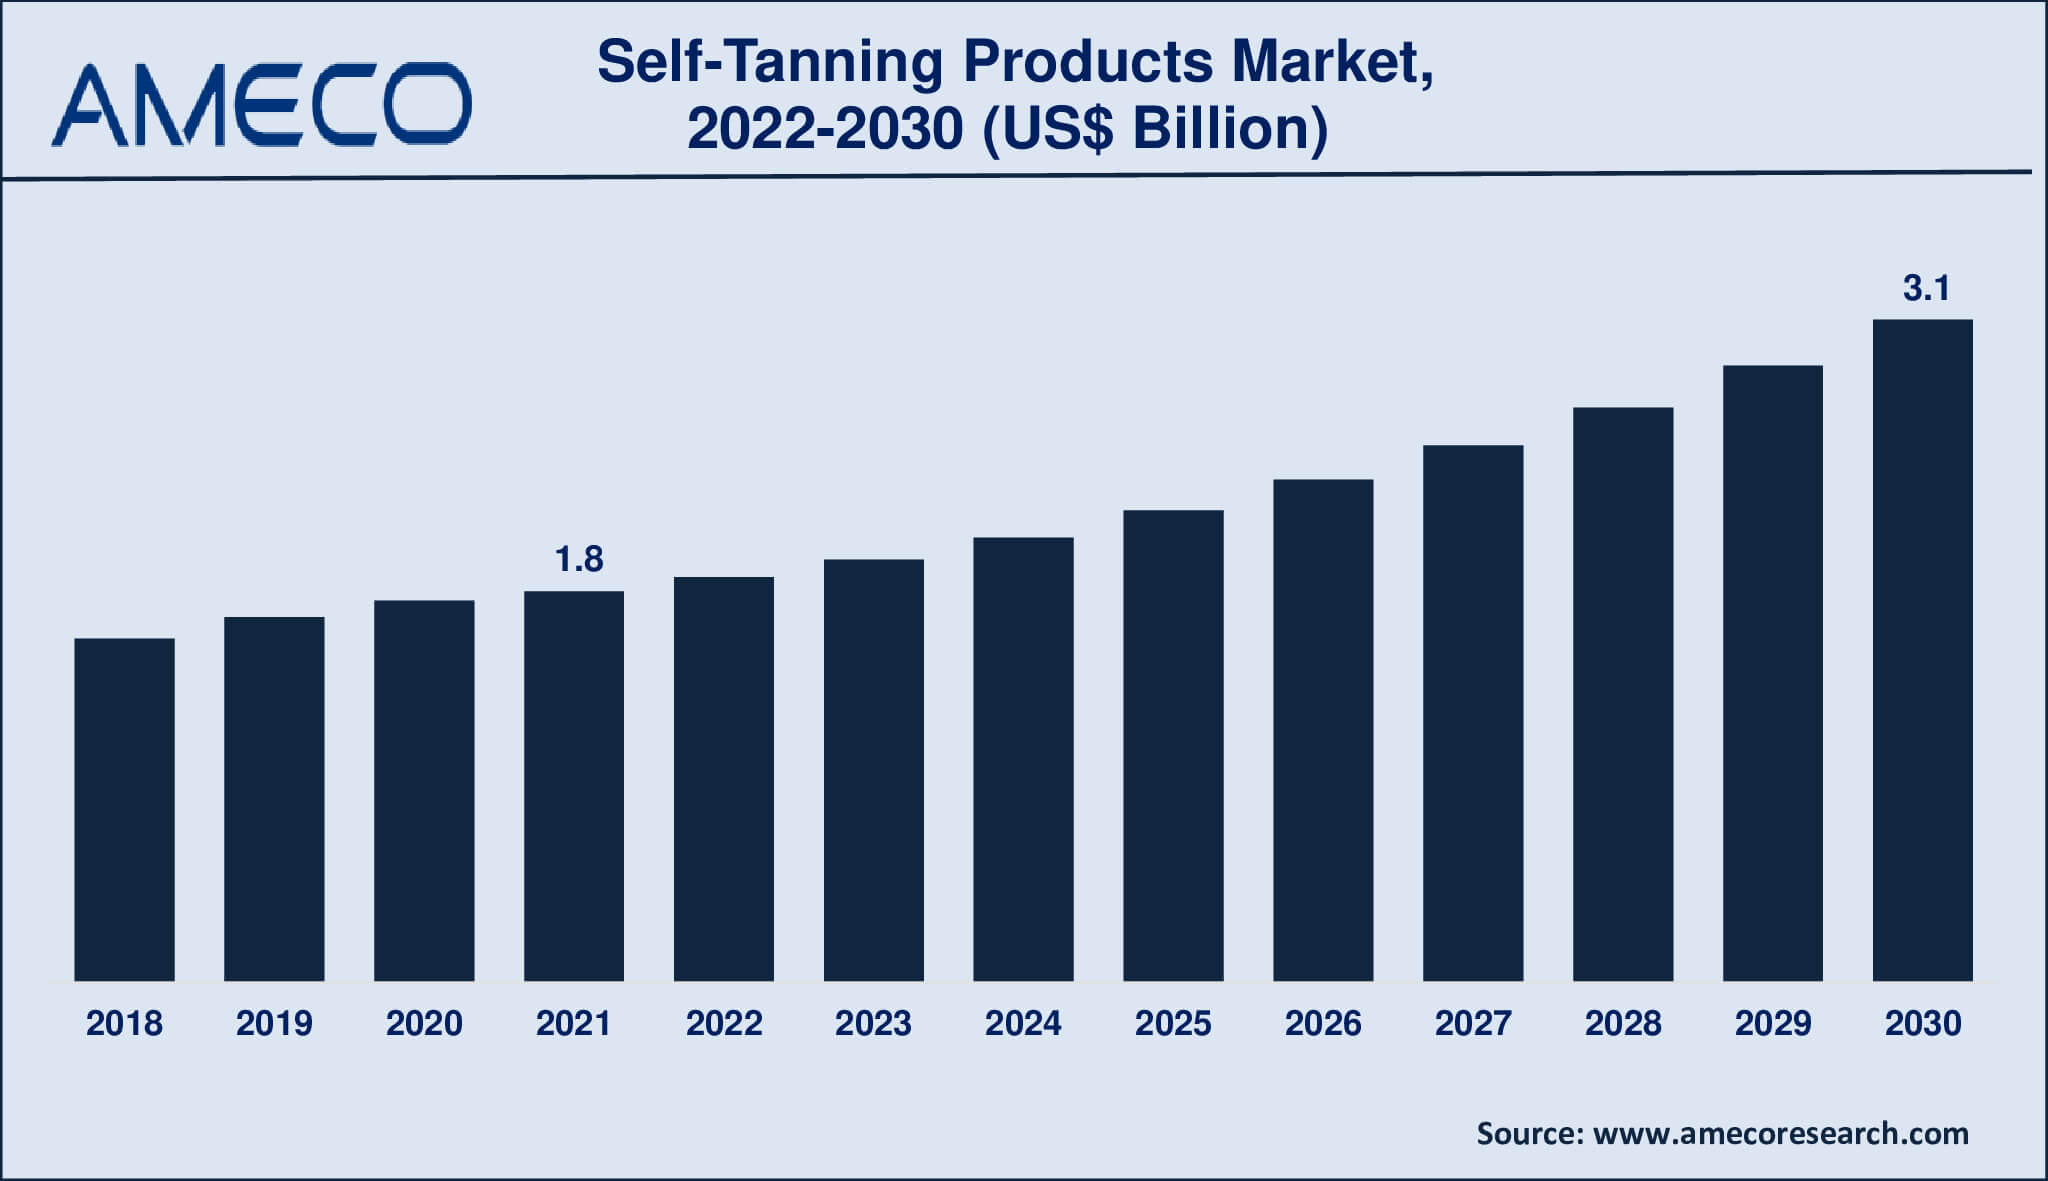 Self-Tanning Products Market Size, Share, Growth, Trends, and Forecast 2022-2030